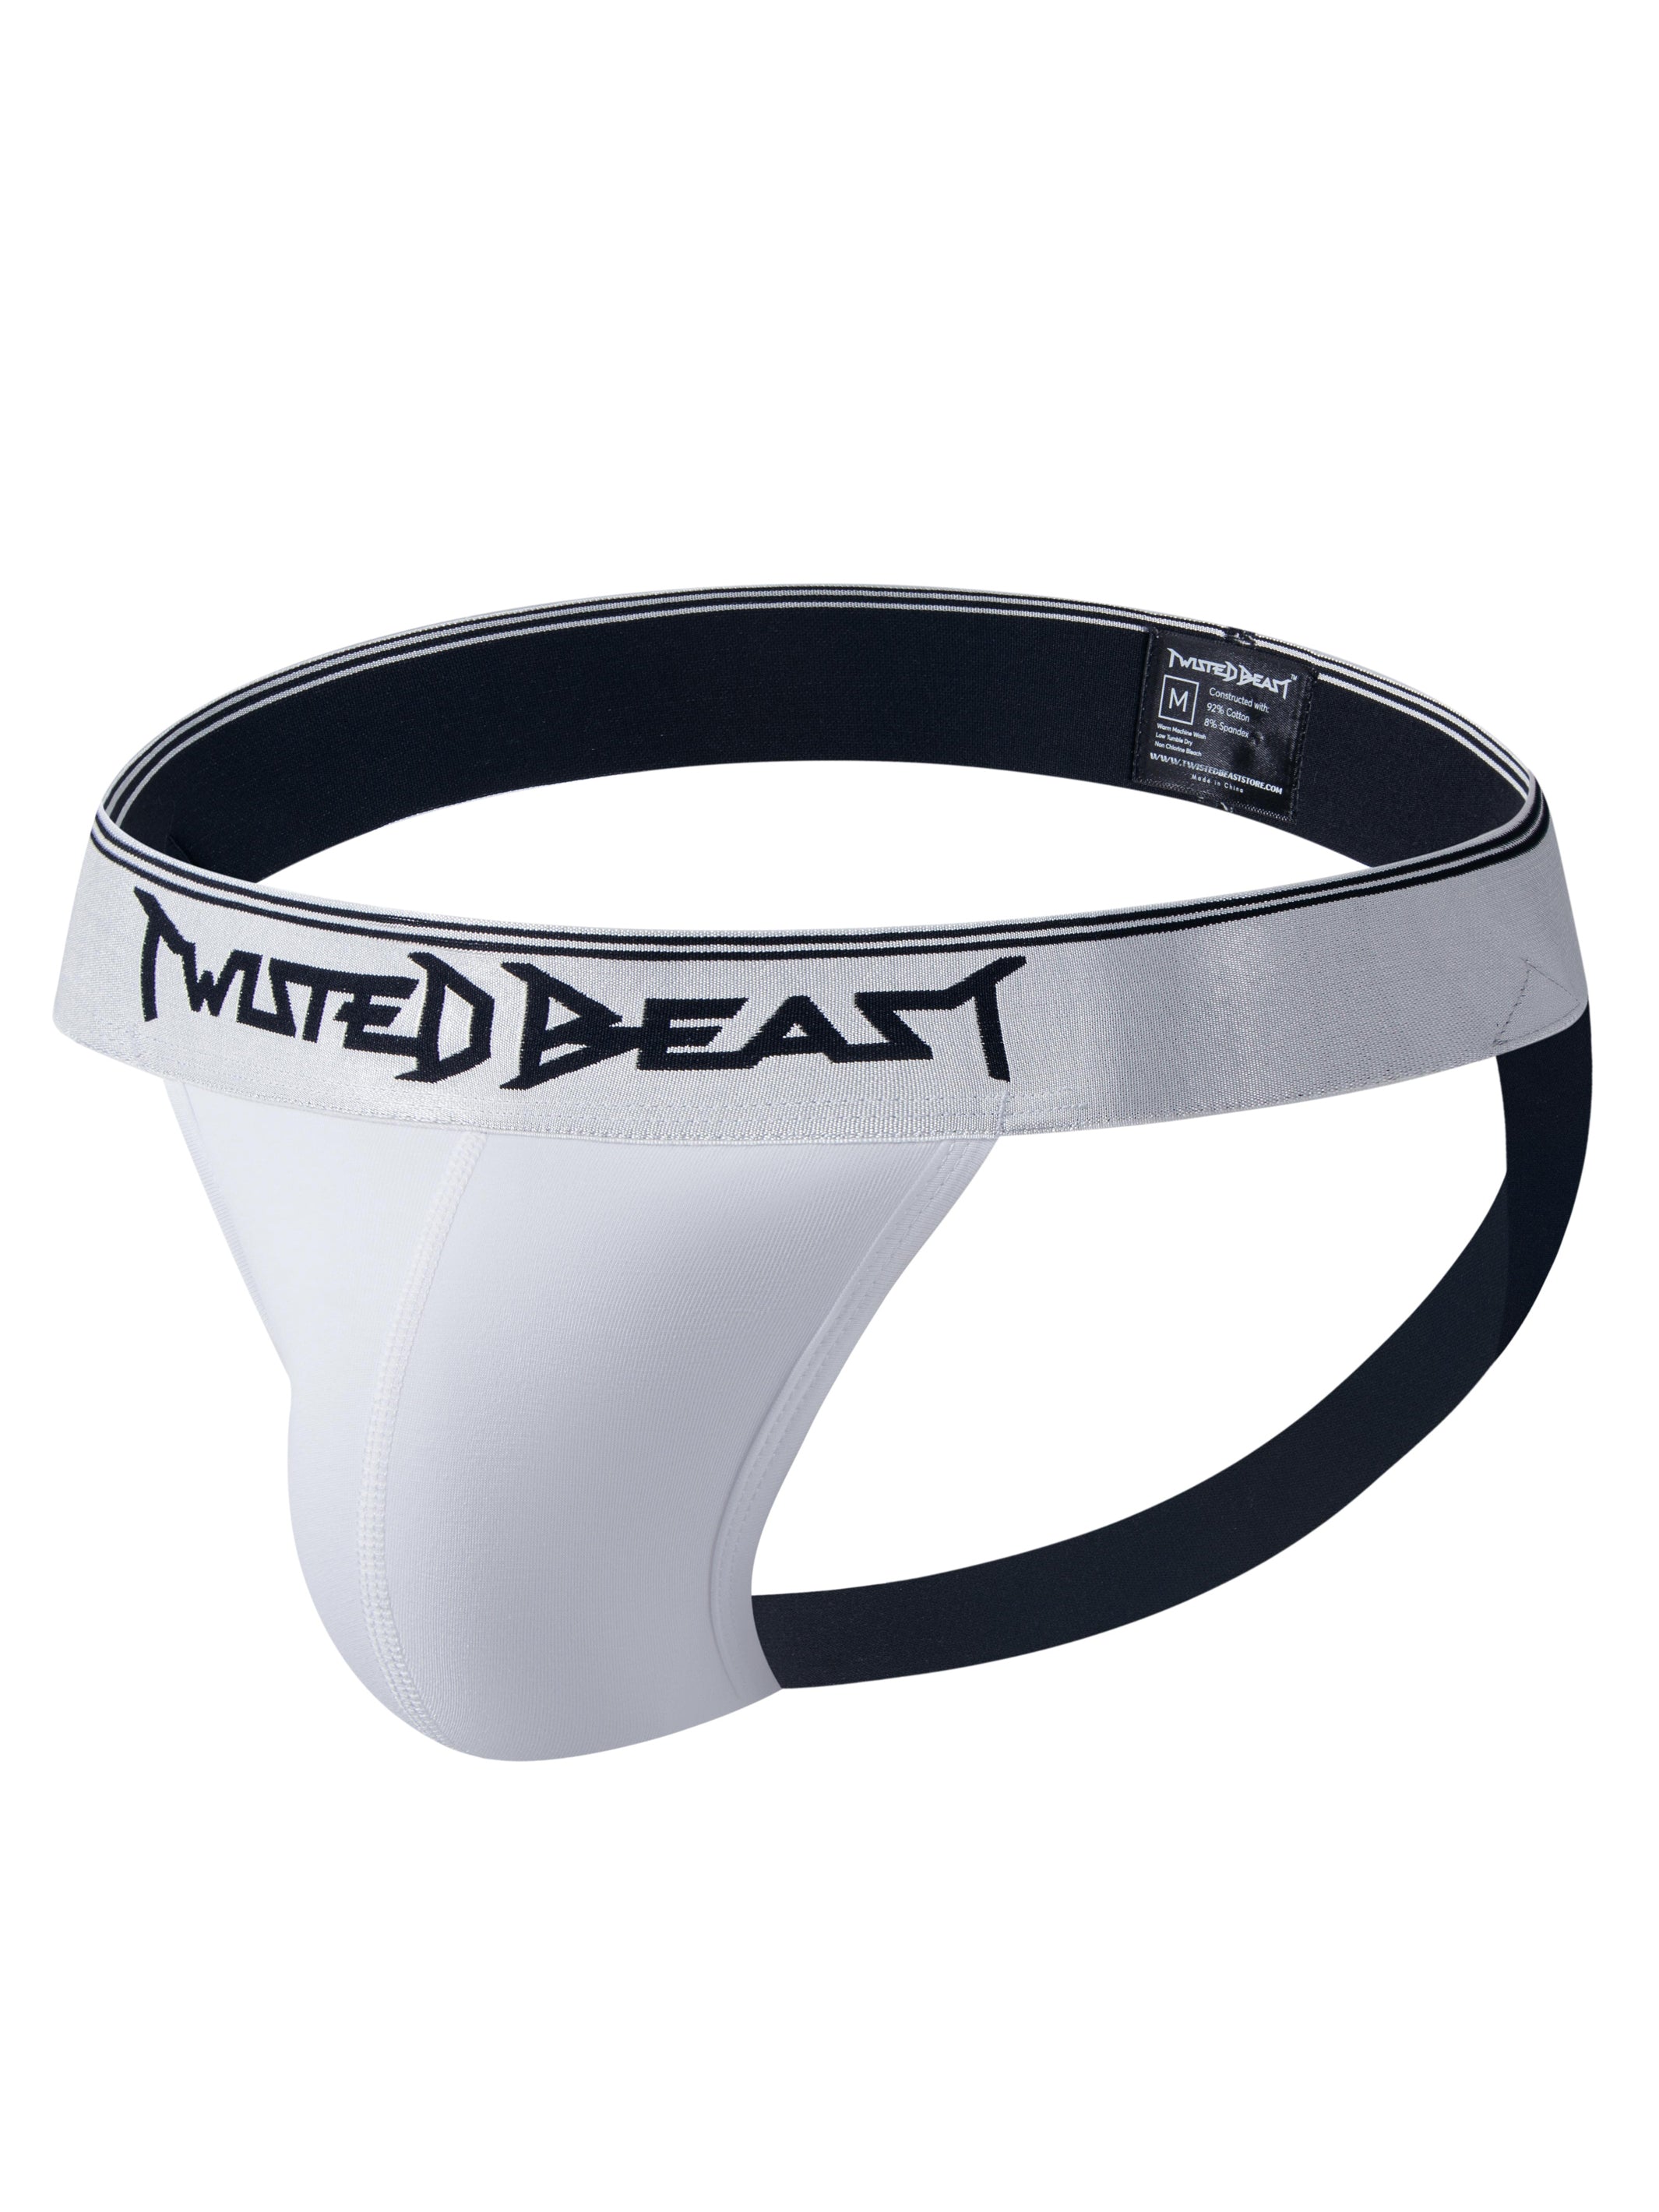 A product photo with a Y2K Jock in white with the Twisted Beast logo on the front.